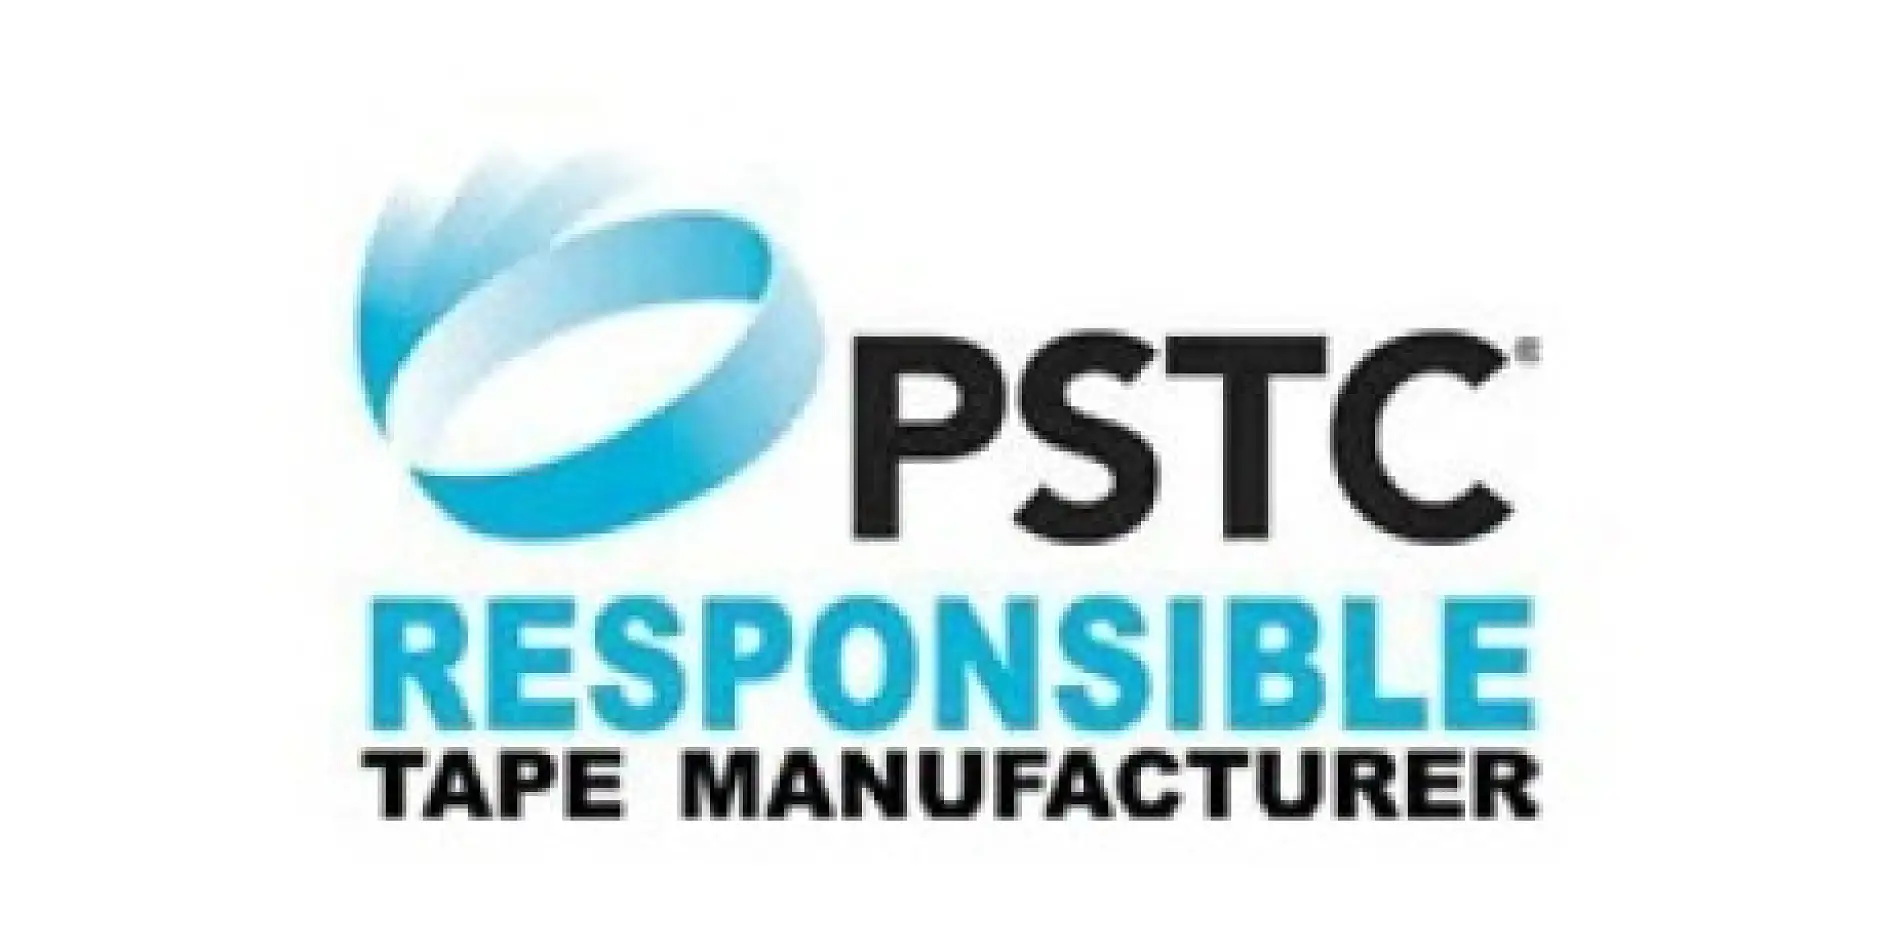 The Pressure Sensitive Tape Council (PSTC) is a non-profit, 60-year old, North American trade association for tape manufacturers and affiliate suppliers, dedicated to helping the industry produce quality pressure sensitive adhesive tape products in the global marketplace.